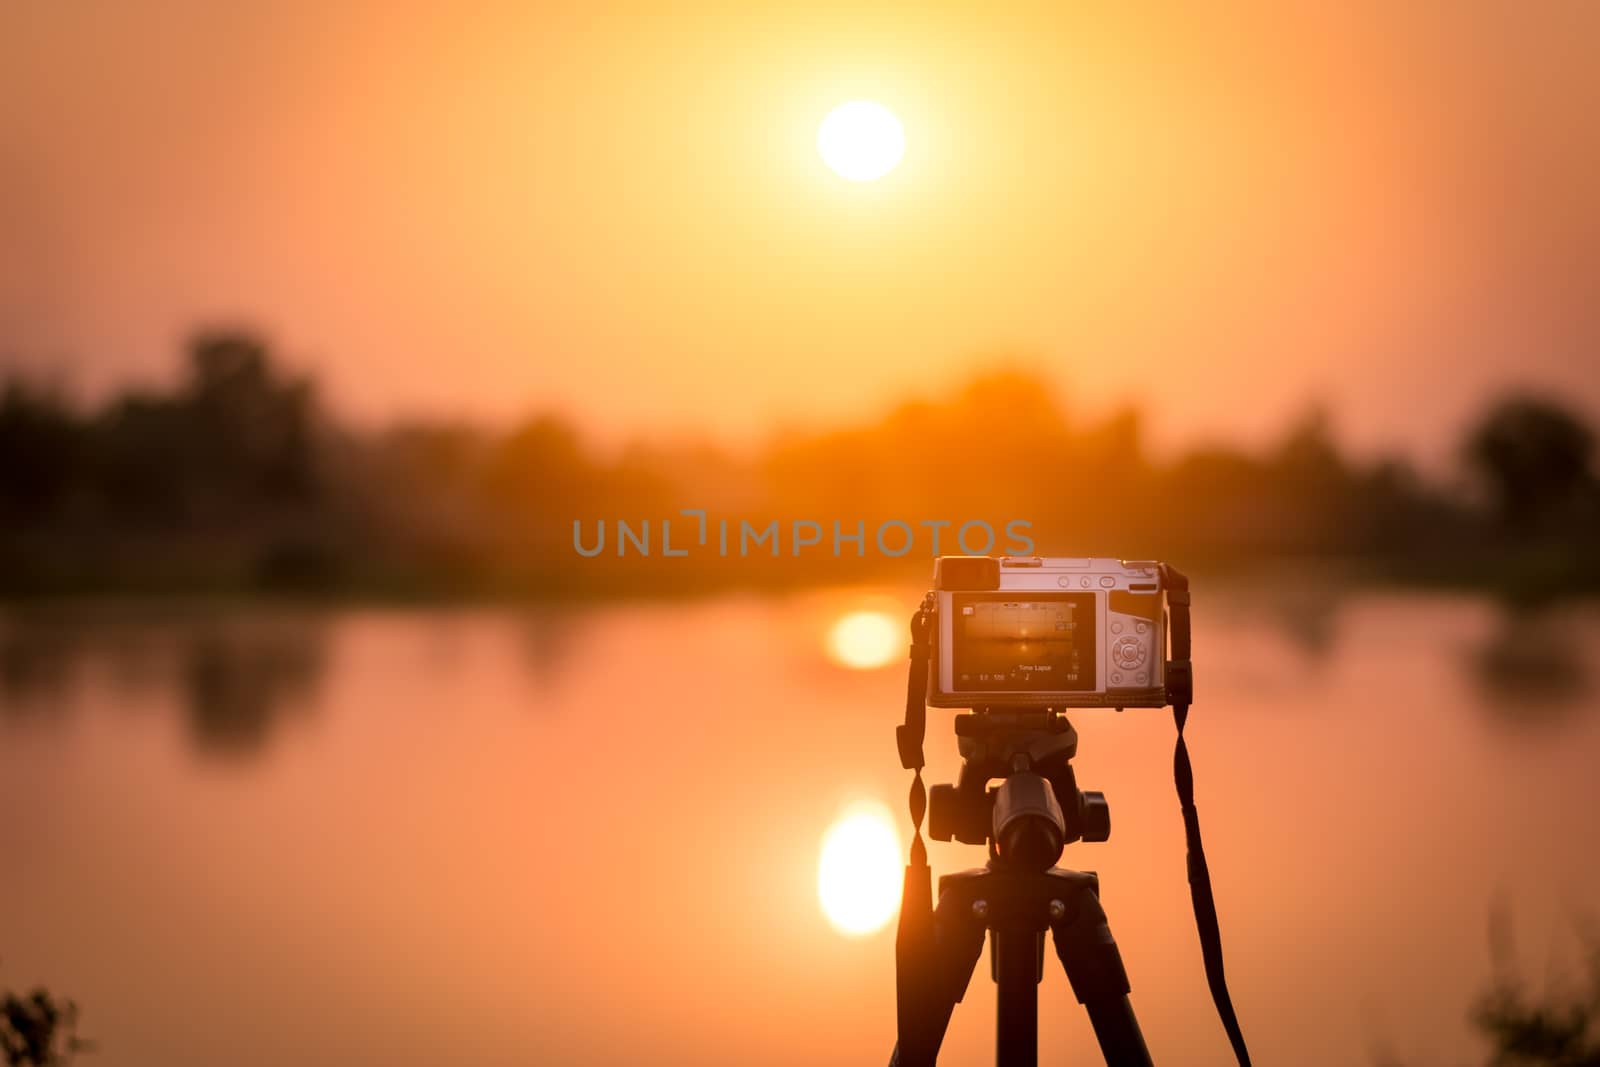 record time-lapse video of the sunset
 by wattanaphob